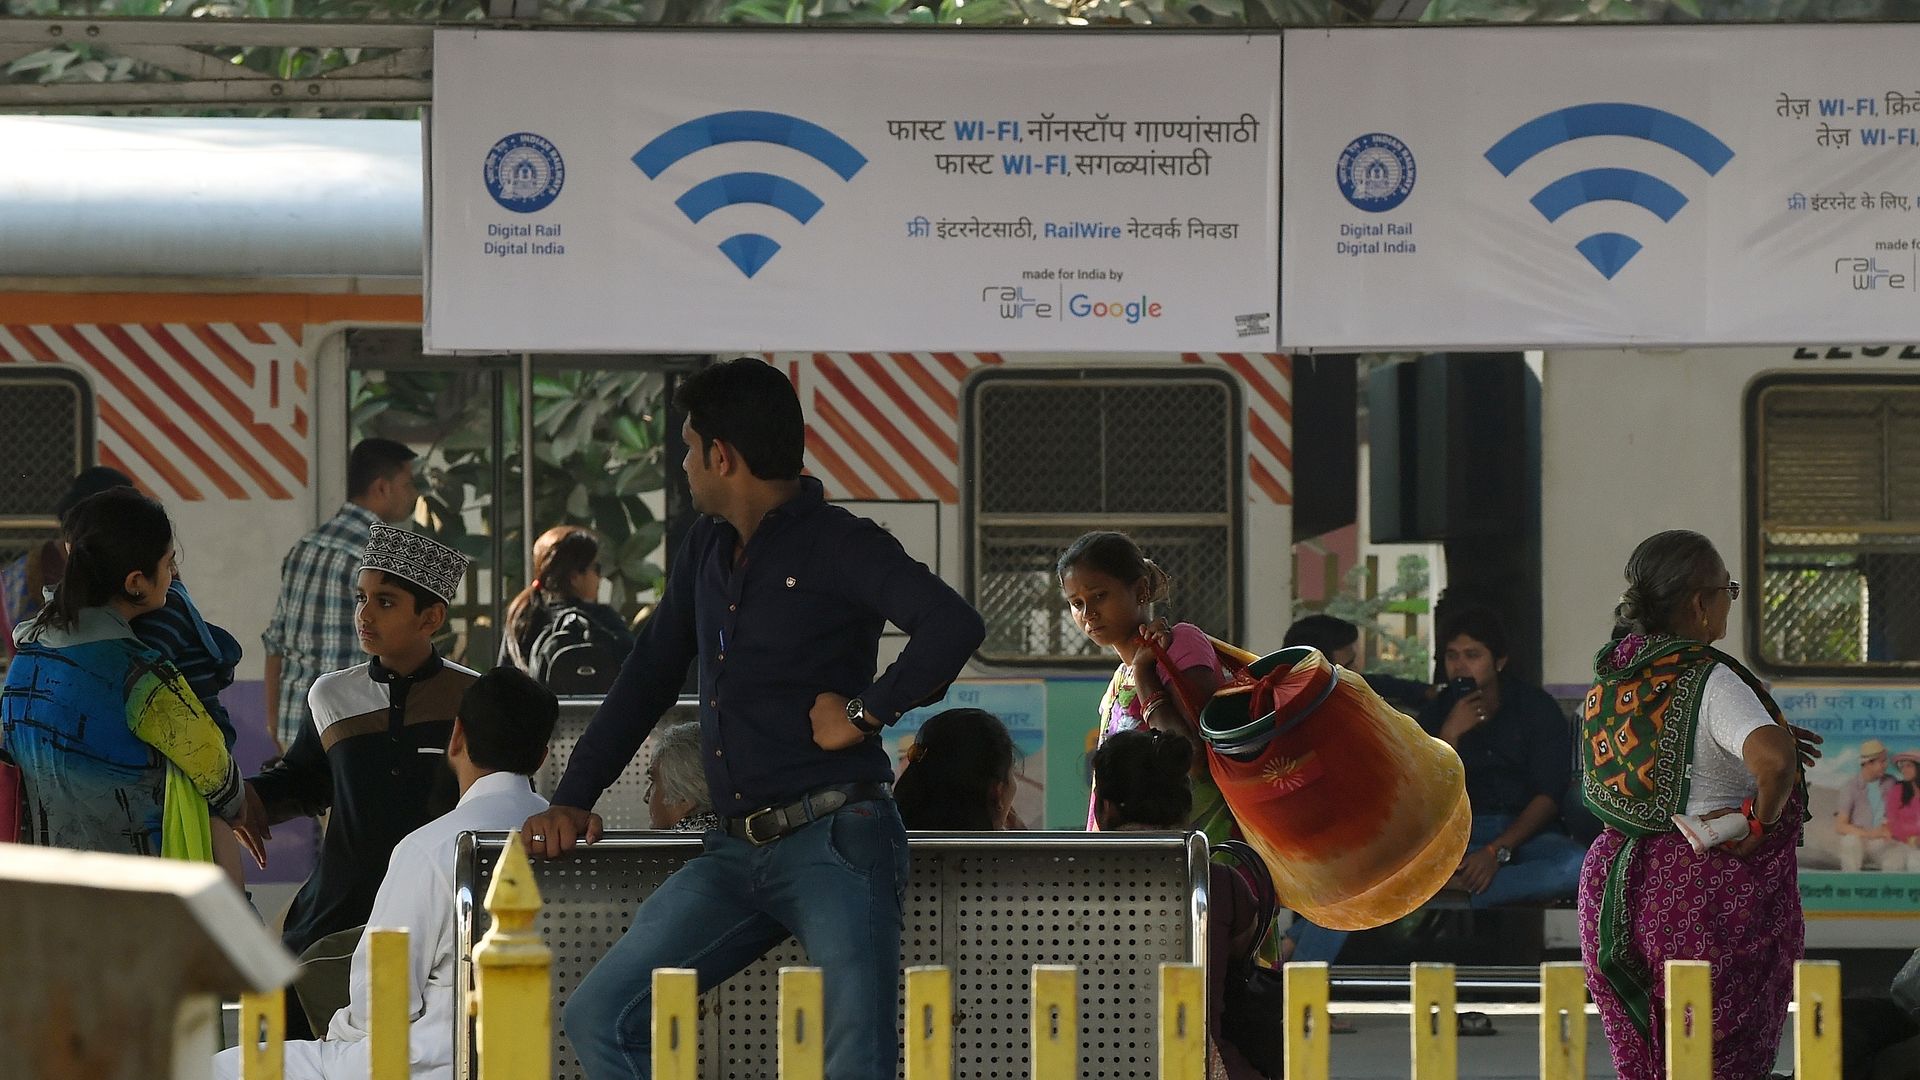 A group of people beneath signs advertising Google's wifi hotspots in India